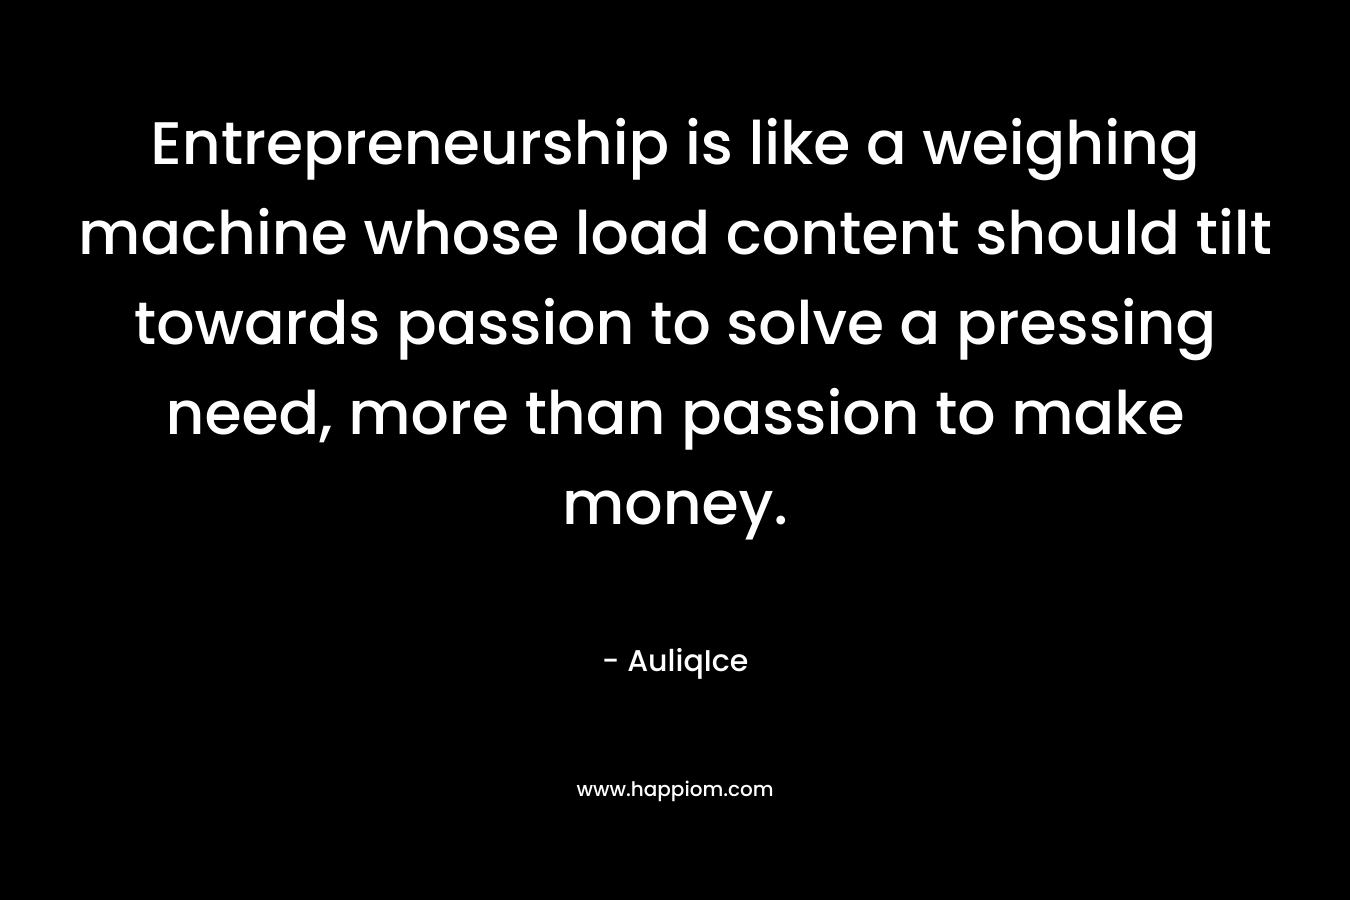 Entrepreneurship is like a weighing machine whose load content should tilt towards passion to solve a pressing need, more than passion to make money.